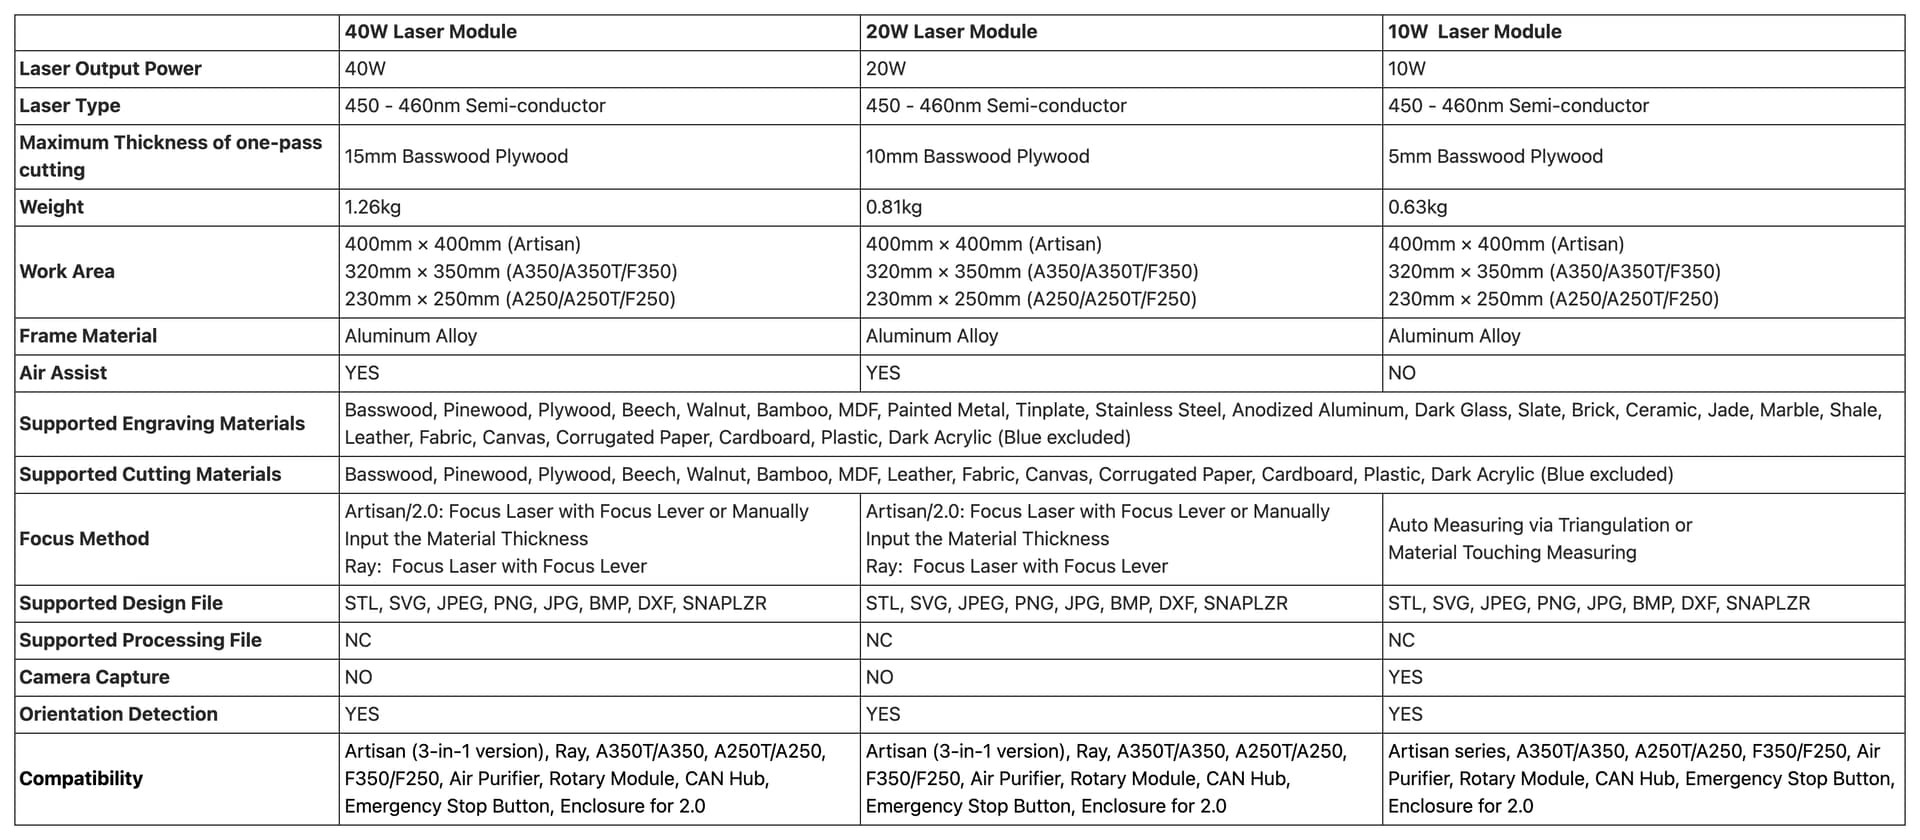 10W 20W and 40W Snapmaker Laser Module Comparison Table